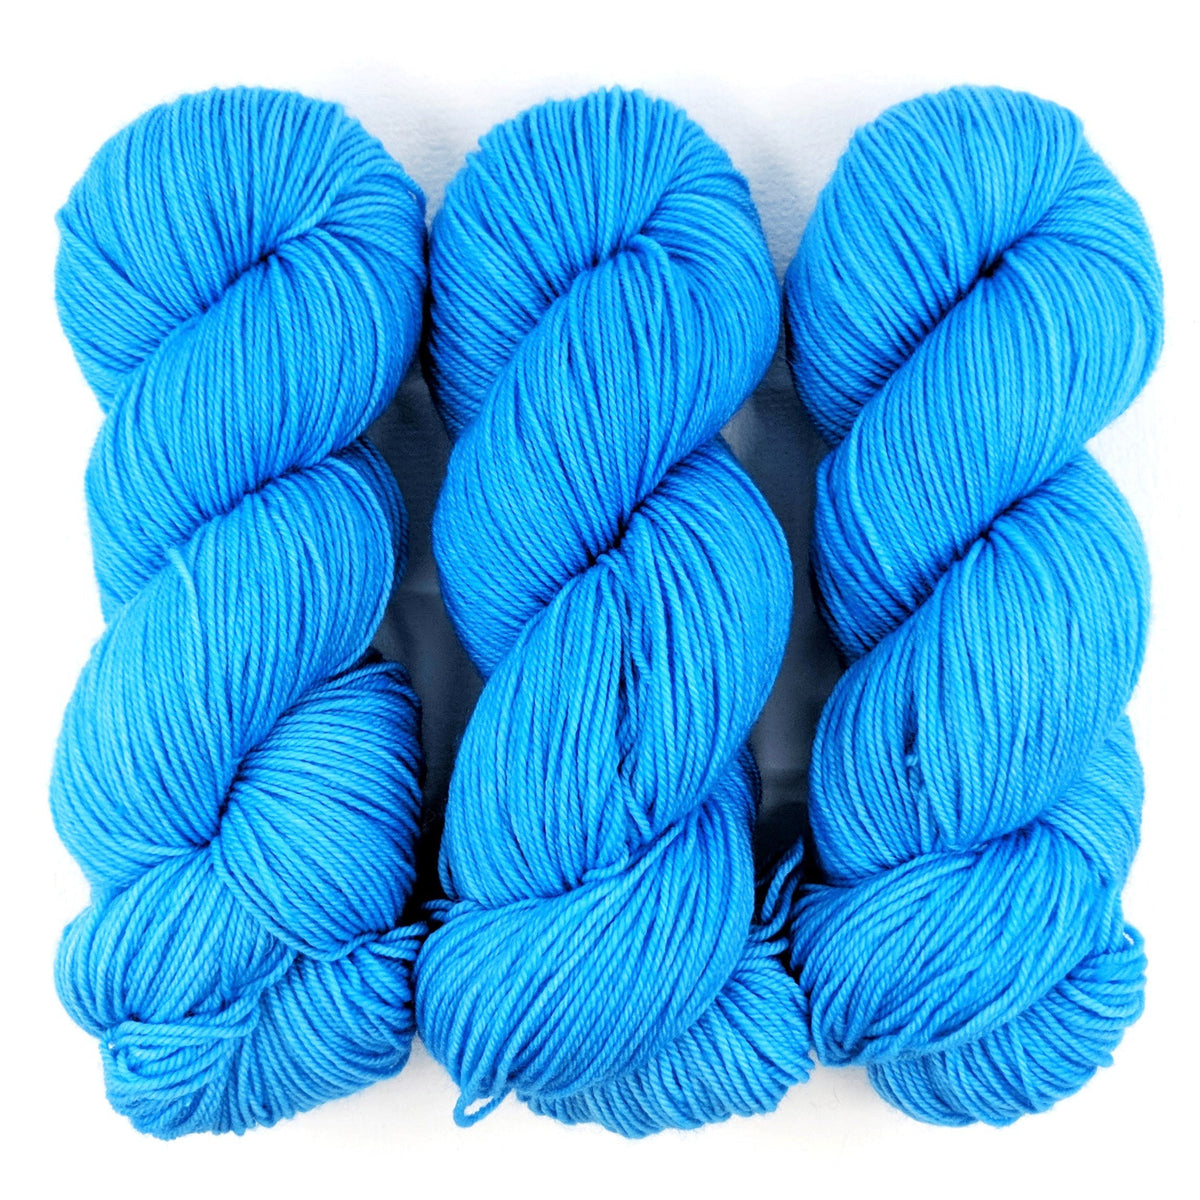 Nothing But Blue Skies - Revival Fingering - Dyed Stock